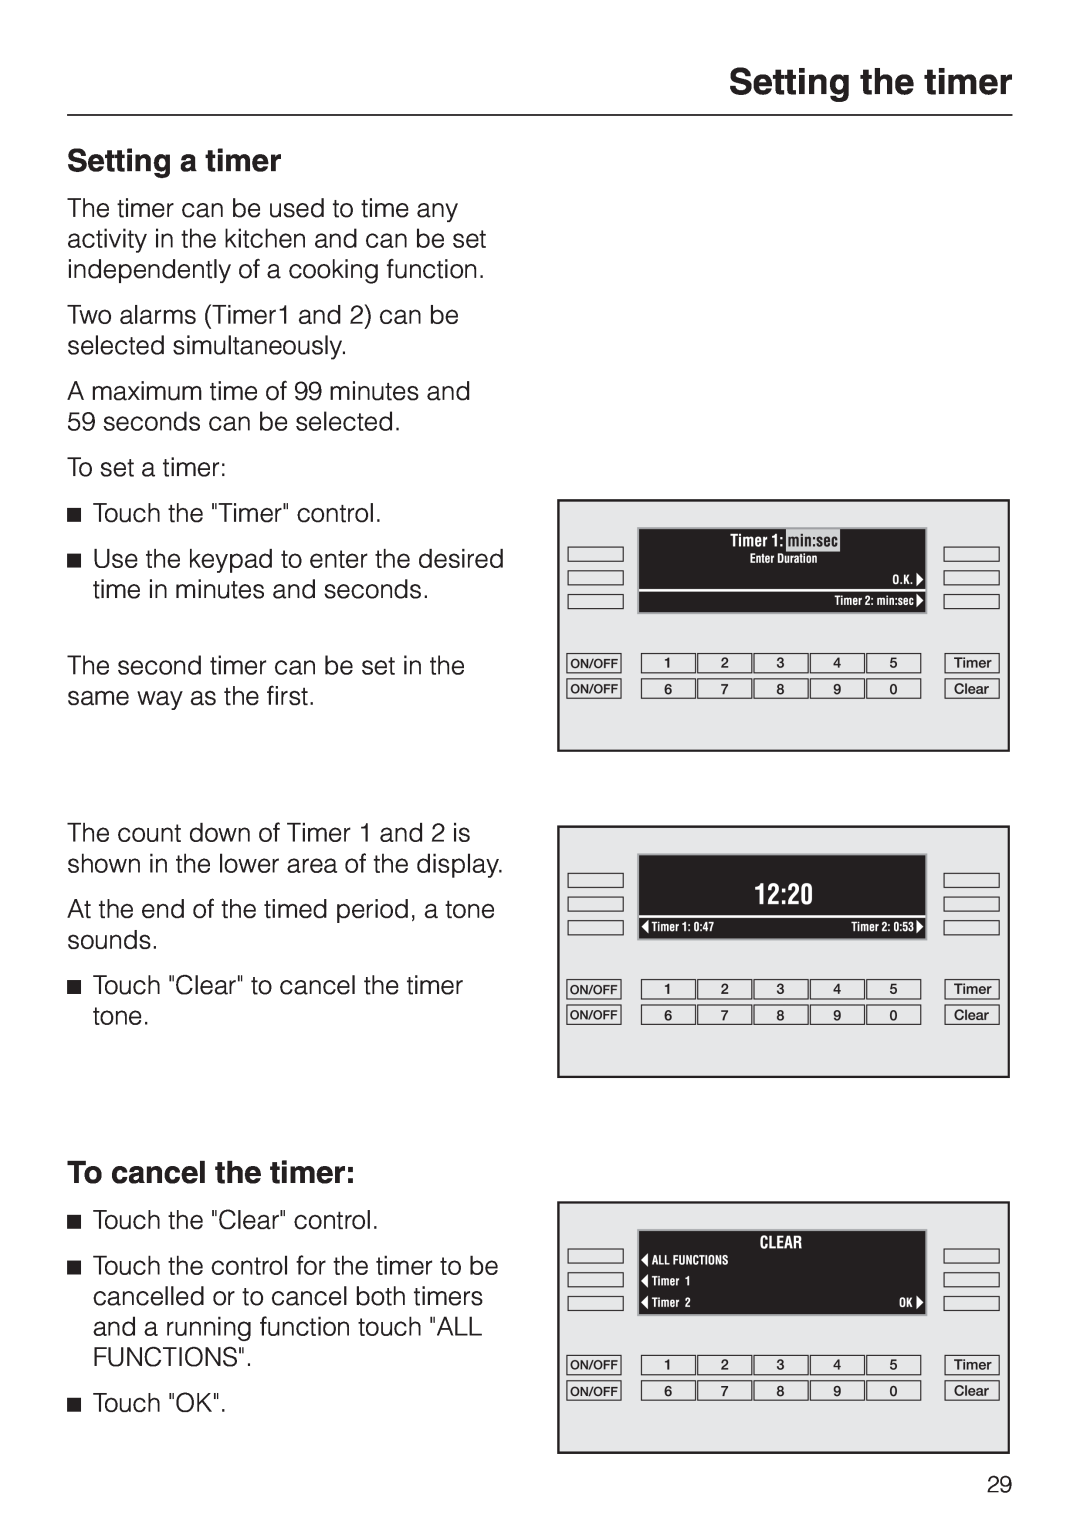 Miele H398BP2, H397BP2 operating instructions Setting the timer, Setting a timer, To cancel the timer 